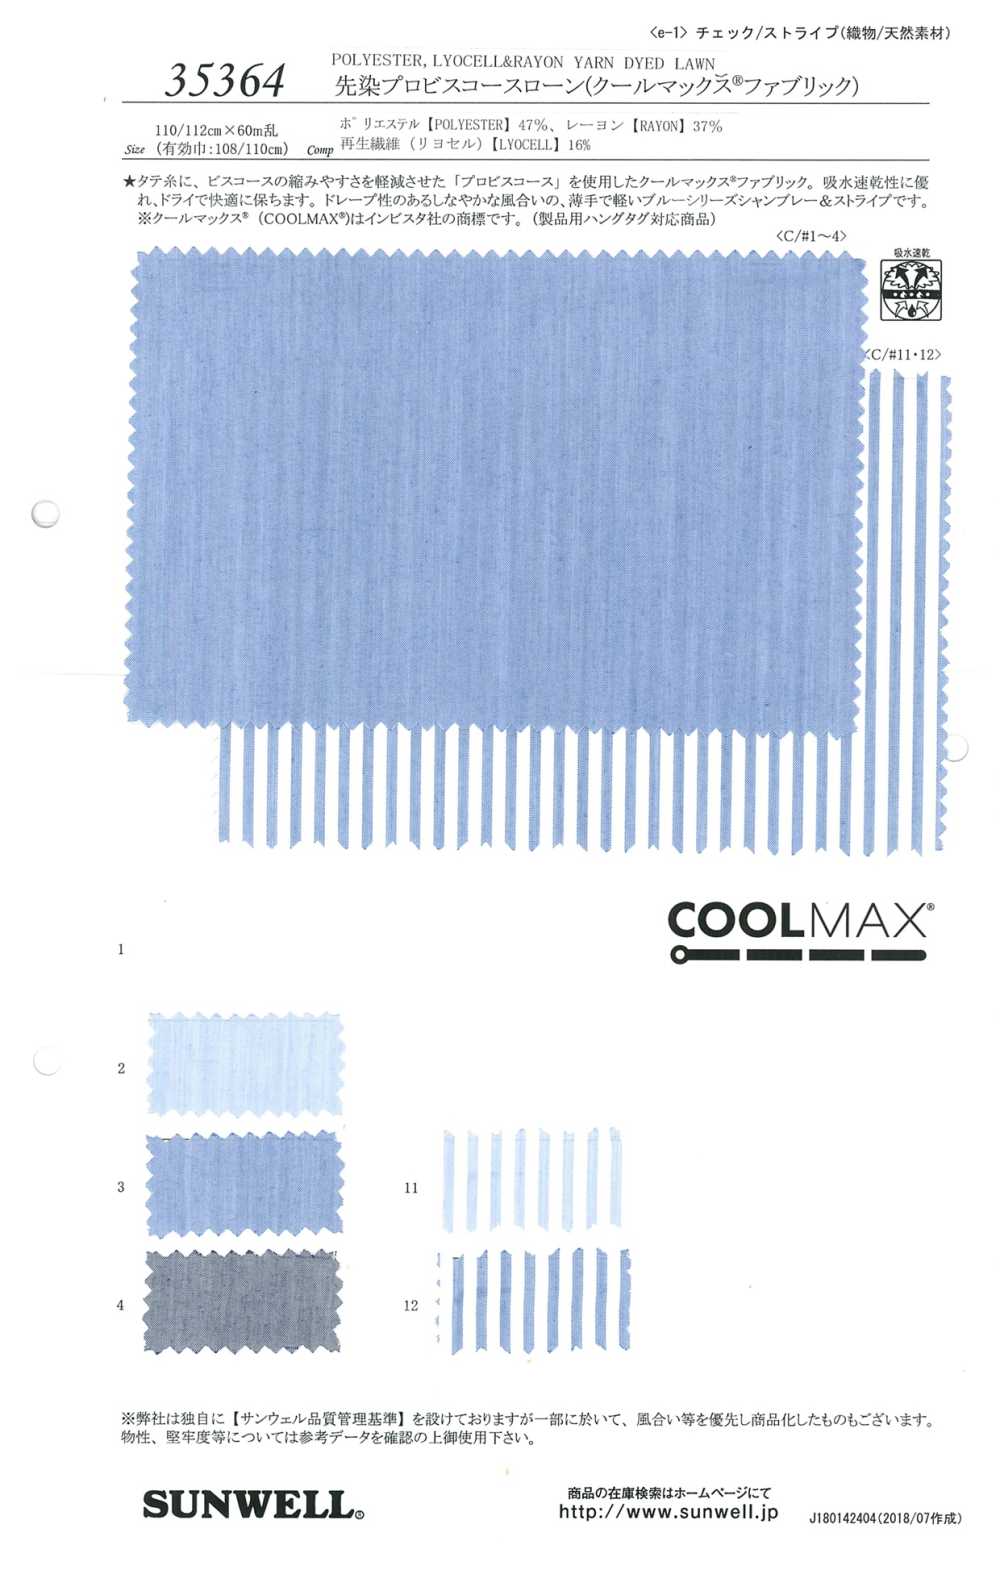 35364 Yarn-dyed Polyester / Cellulose Lawn (Coolmax® Fabric)[Textile / Fabric] SUNWELL